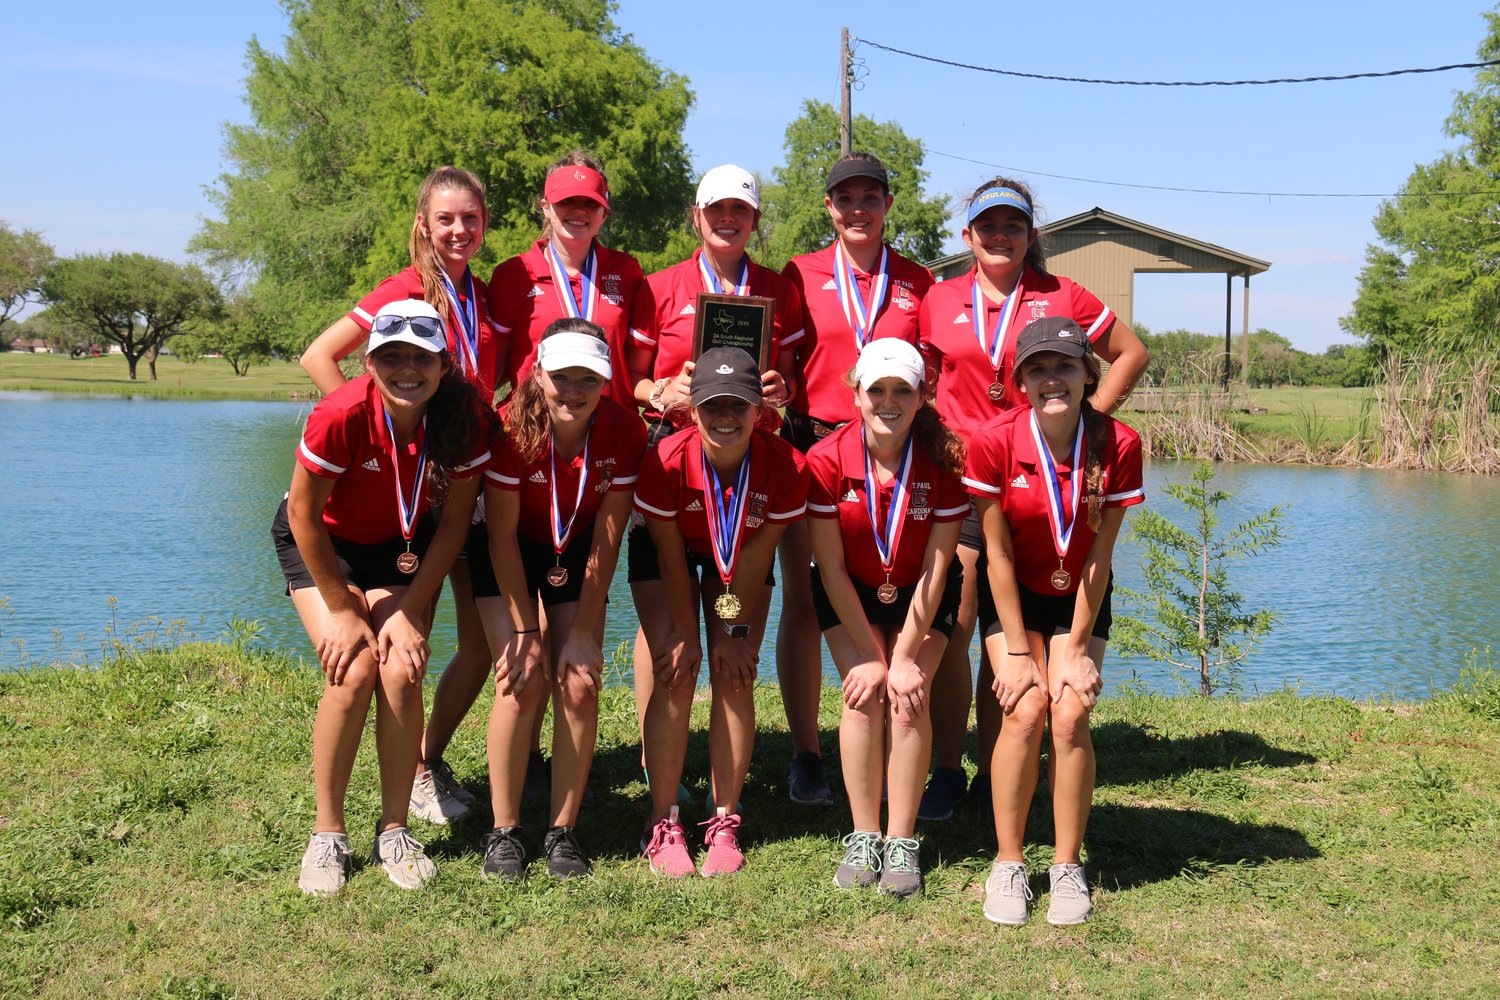 Golfers on the St. Paul girls team in the back row (from left) Tristin Davis, Maddie Stamport, Paige Brown, Sarah Peters and Sydney Hermann. In the front row (from left) are Kate Ehrig, Hannah Timmons, Sadie Thibodeaux, Bailey Blair and Macy Grabarkievtz.